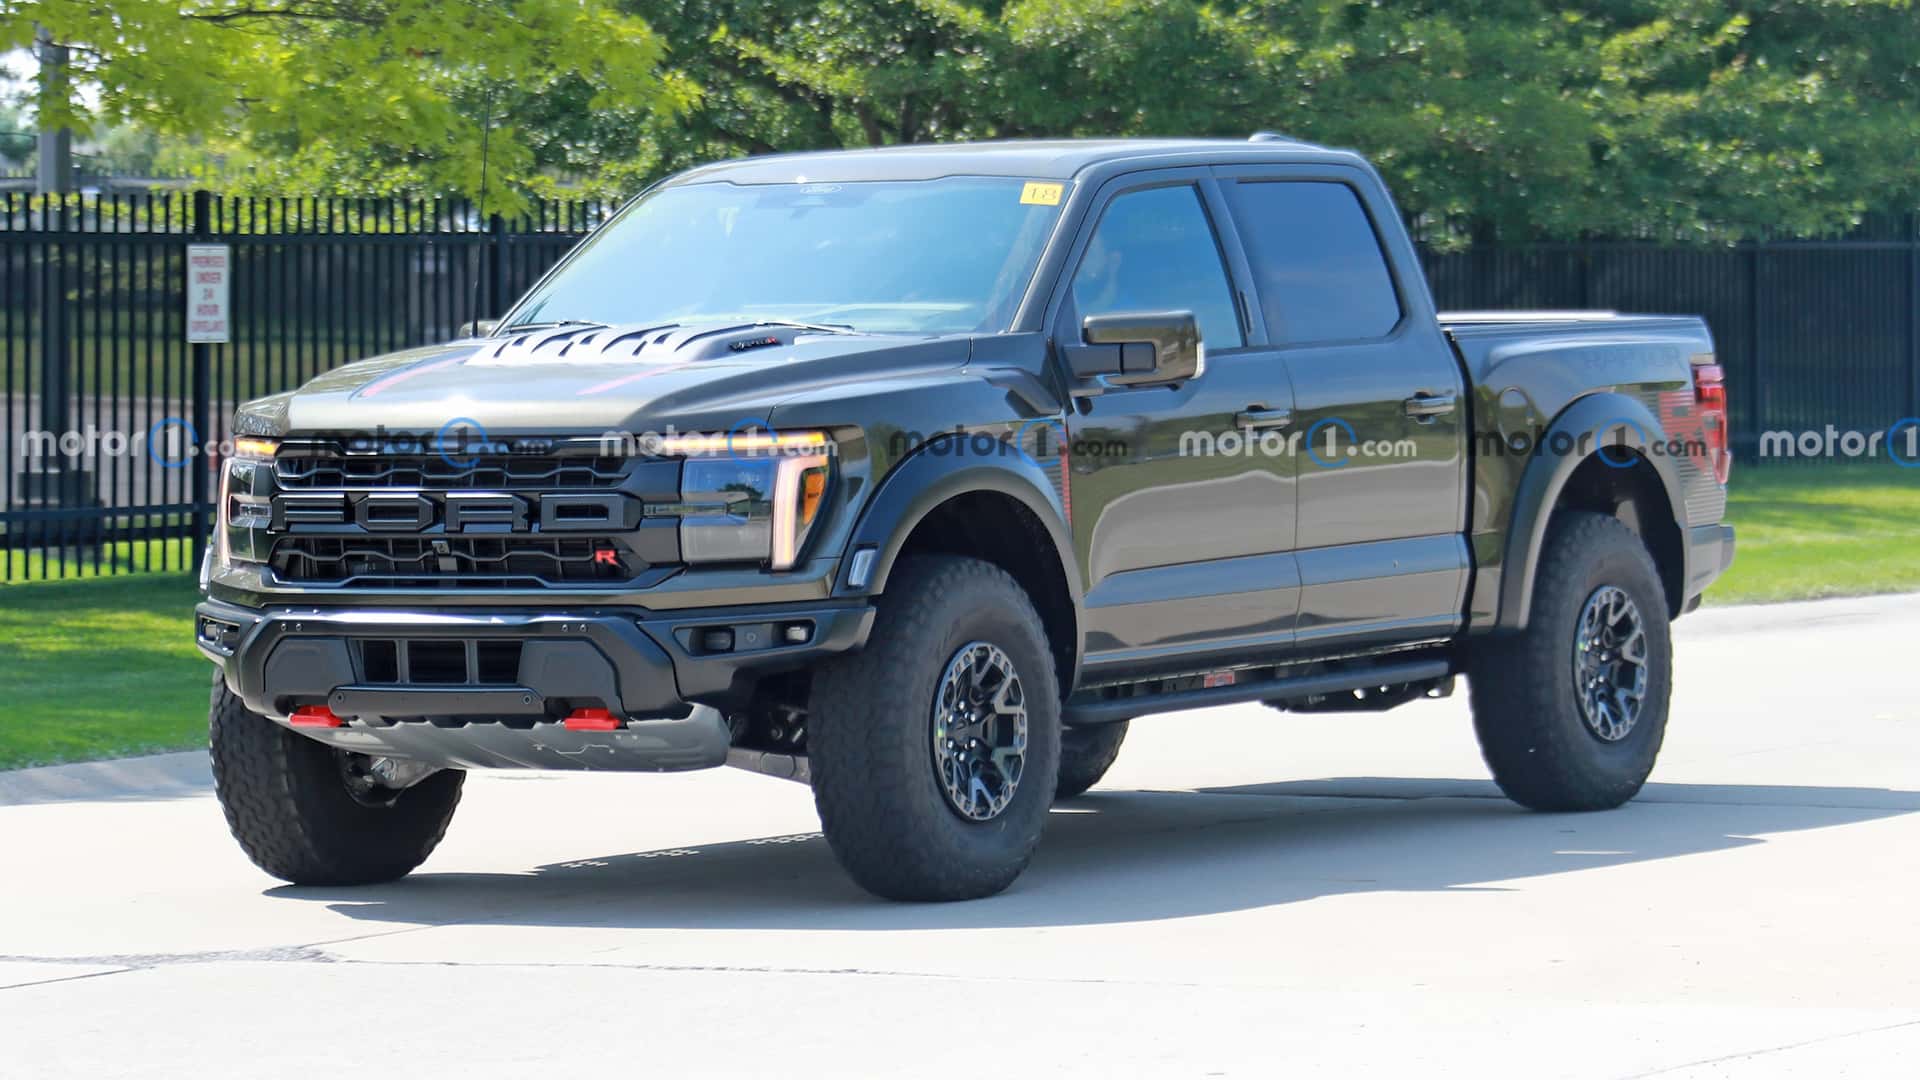 The $109K Ford F-150 Raptor R Is So Hot It Costs Much More, 43% OFF